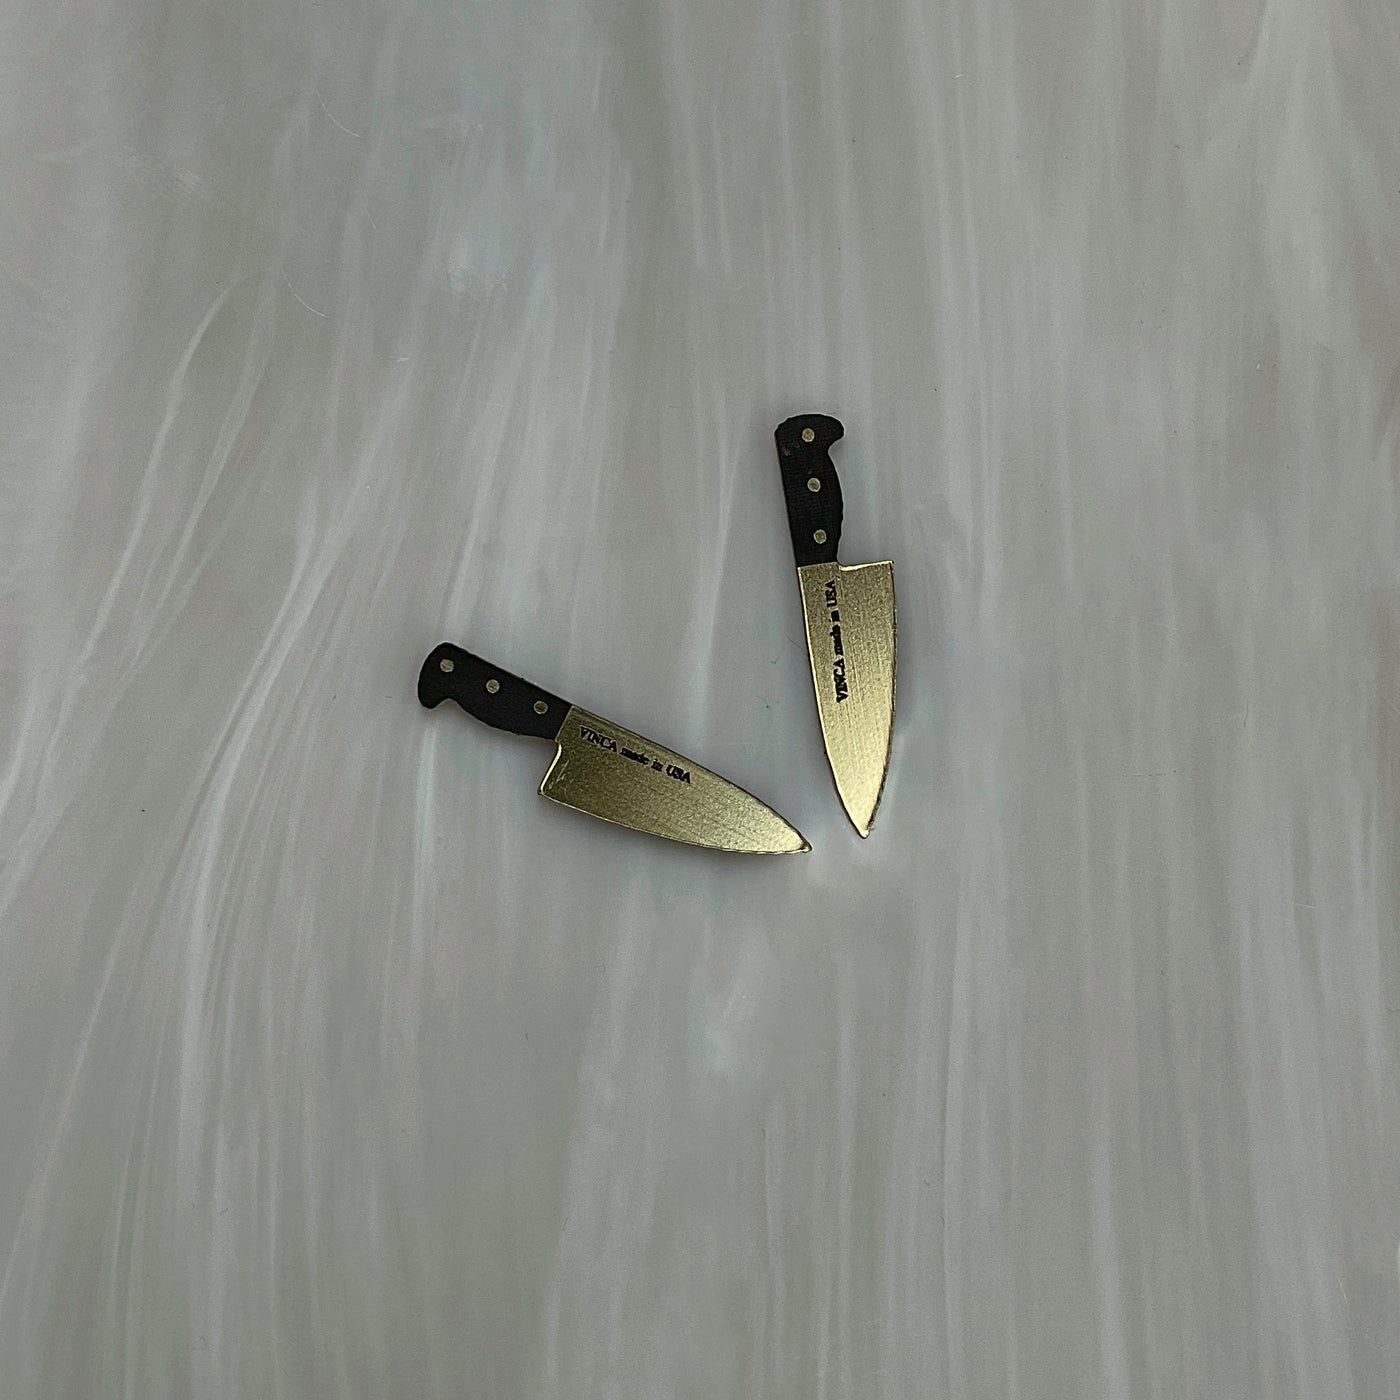 Tiny 1” Chef's Knife Earrings in Gold/Black